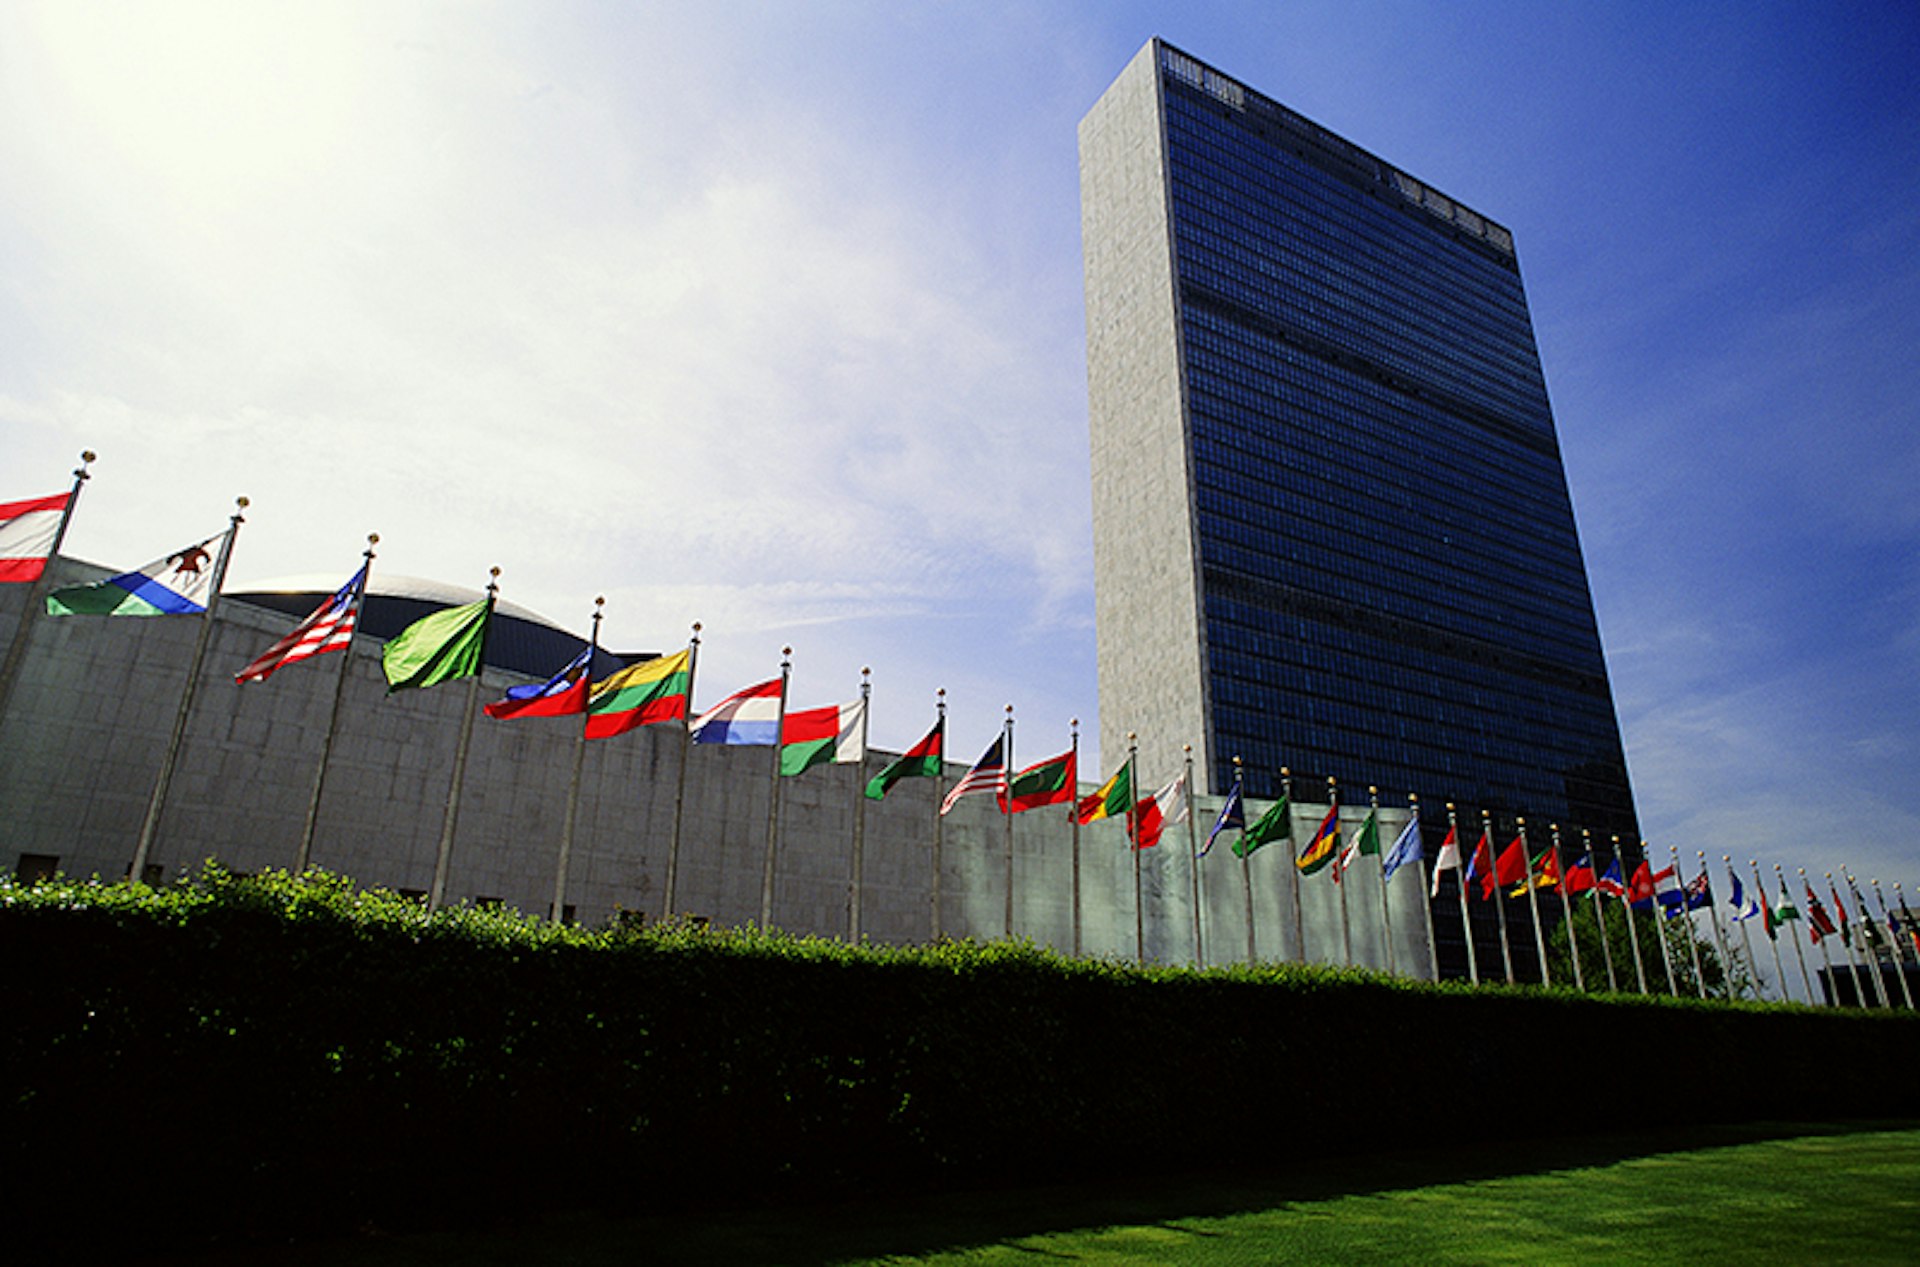 The United Nations. Photo by Michael Goldman/Getty Images